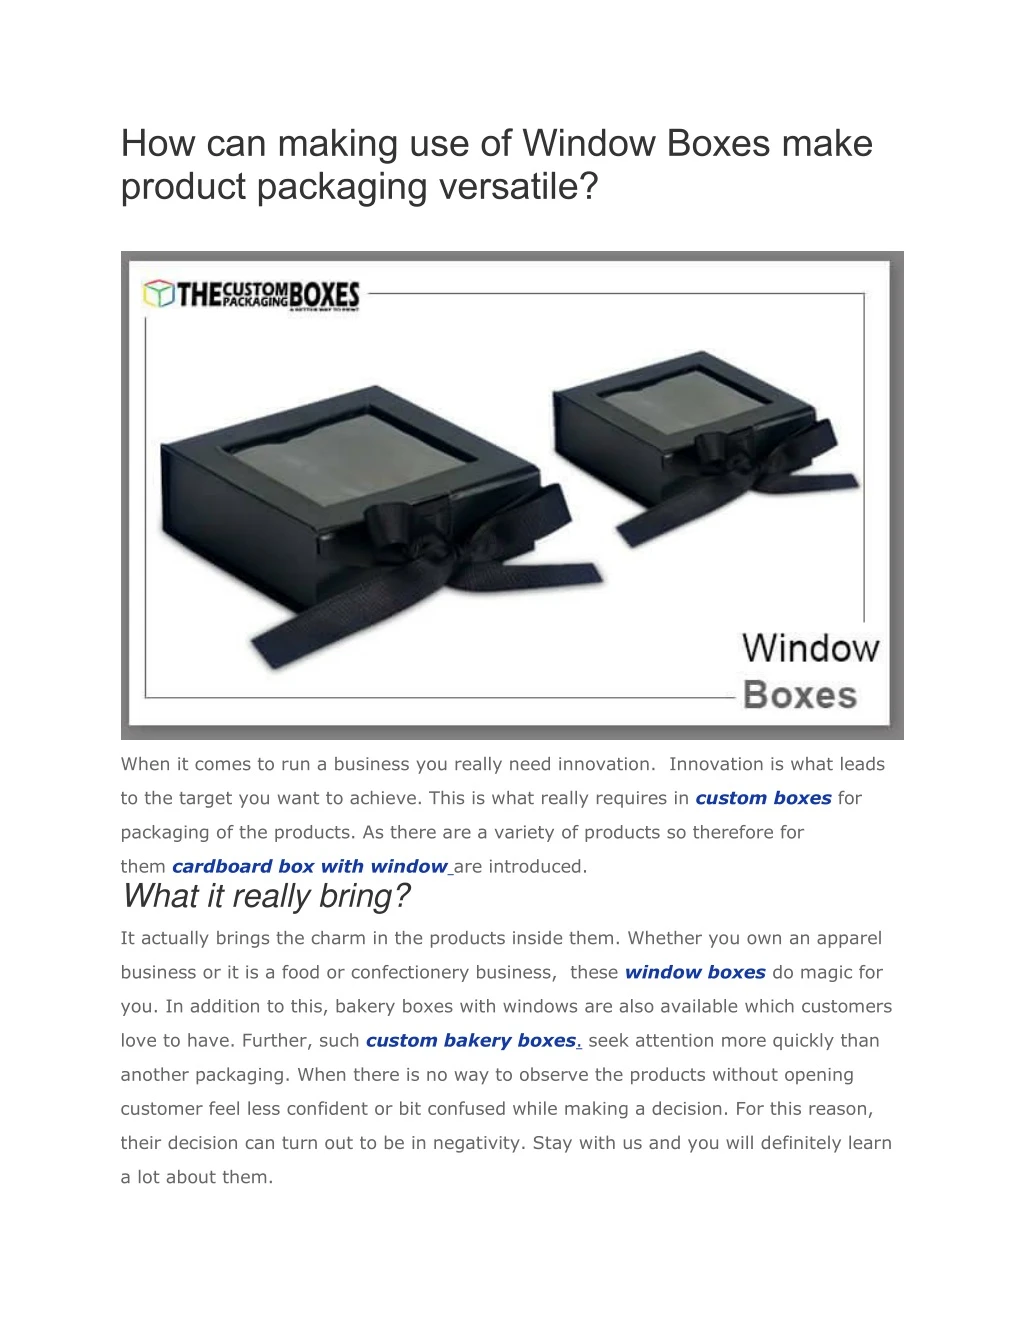 how can making use of window boxes make product